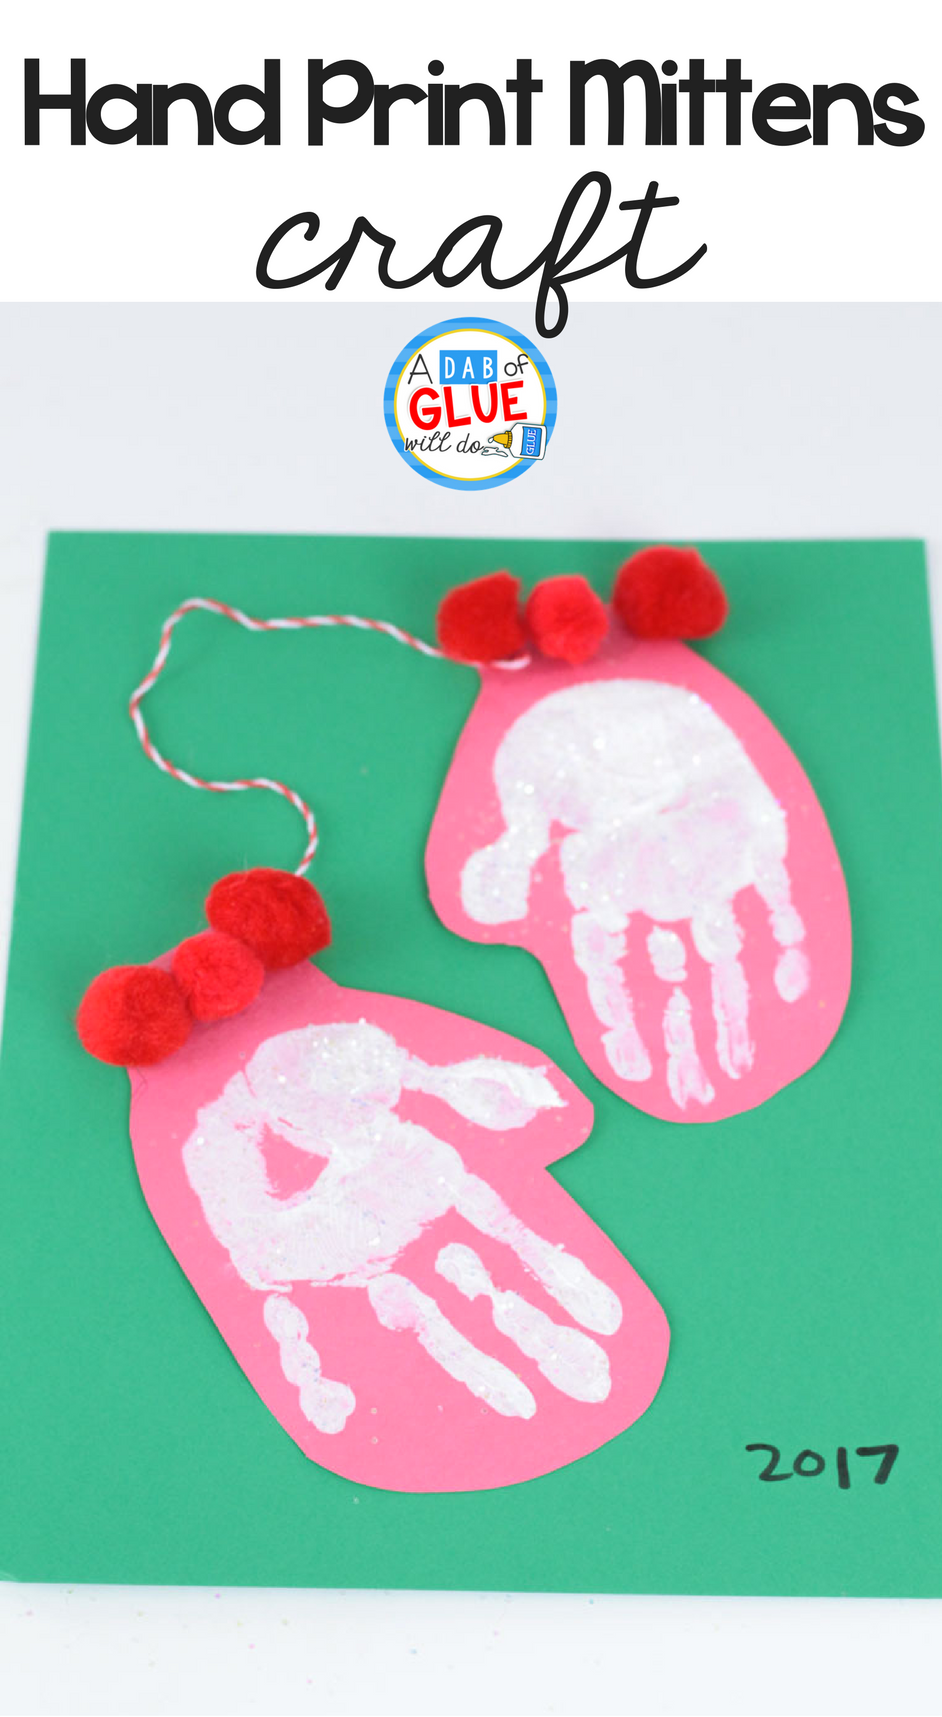 This hand print mitten craft is a variation on the common hand print crafts done during the Christmas season to preserve the appearance of a child's hand.